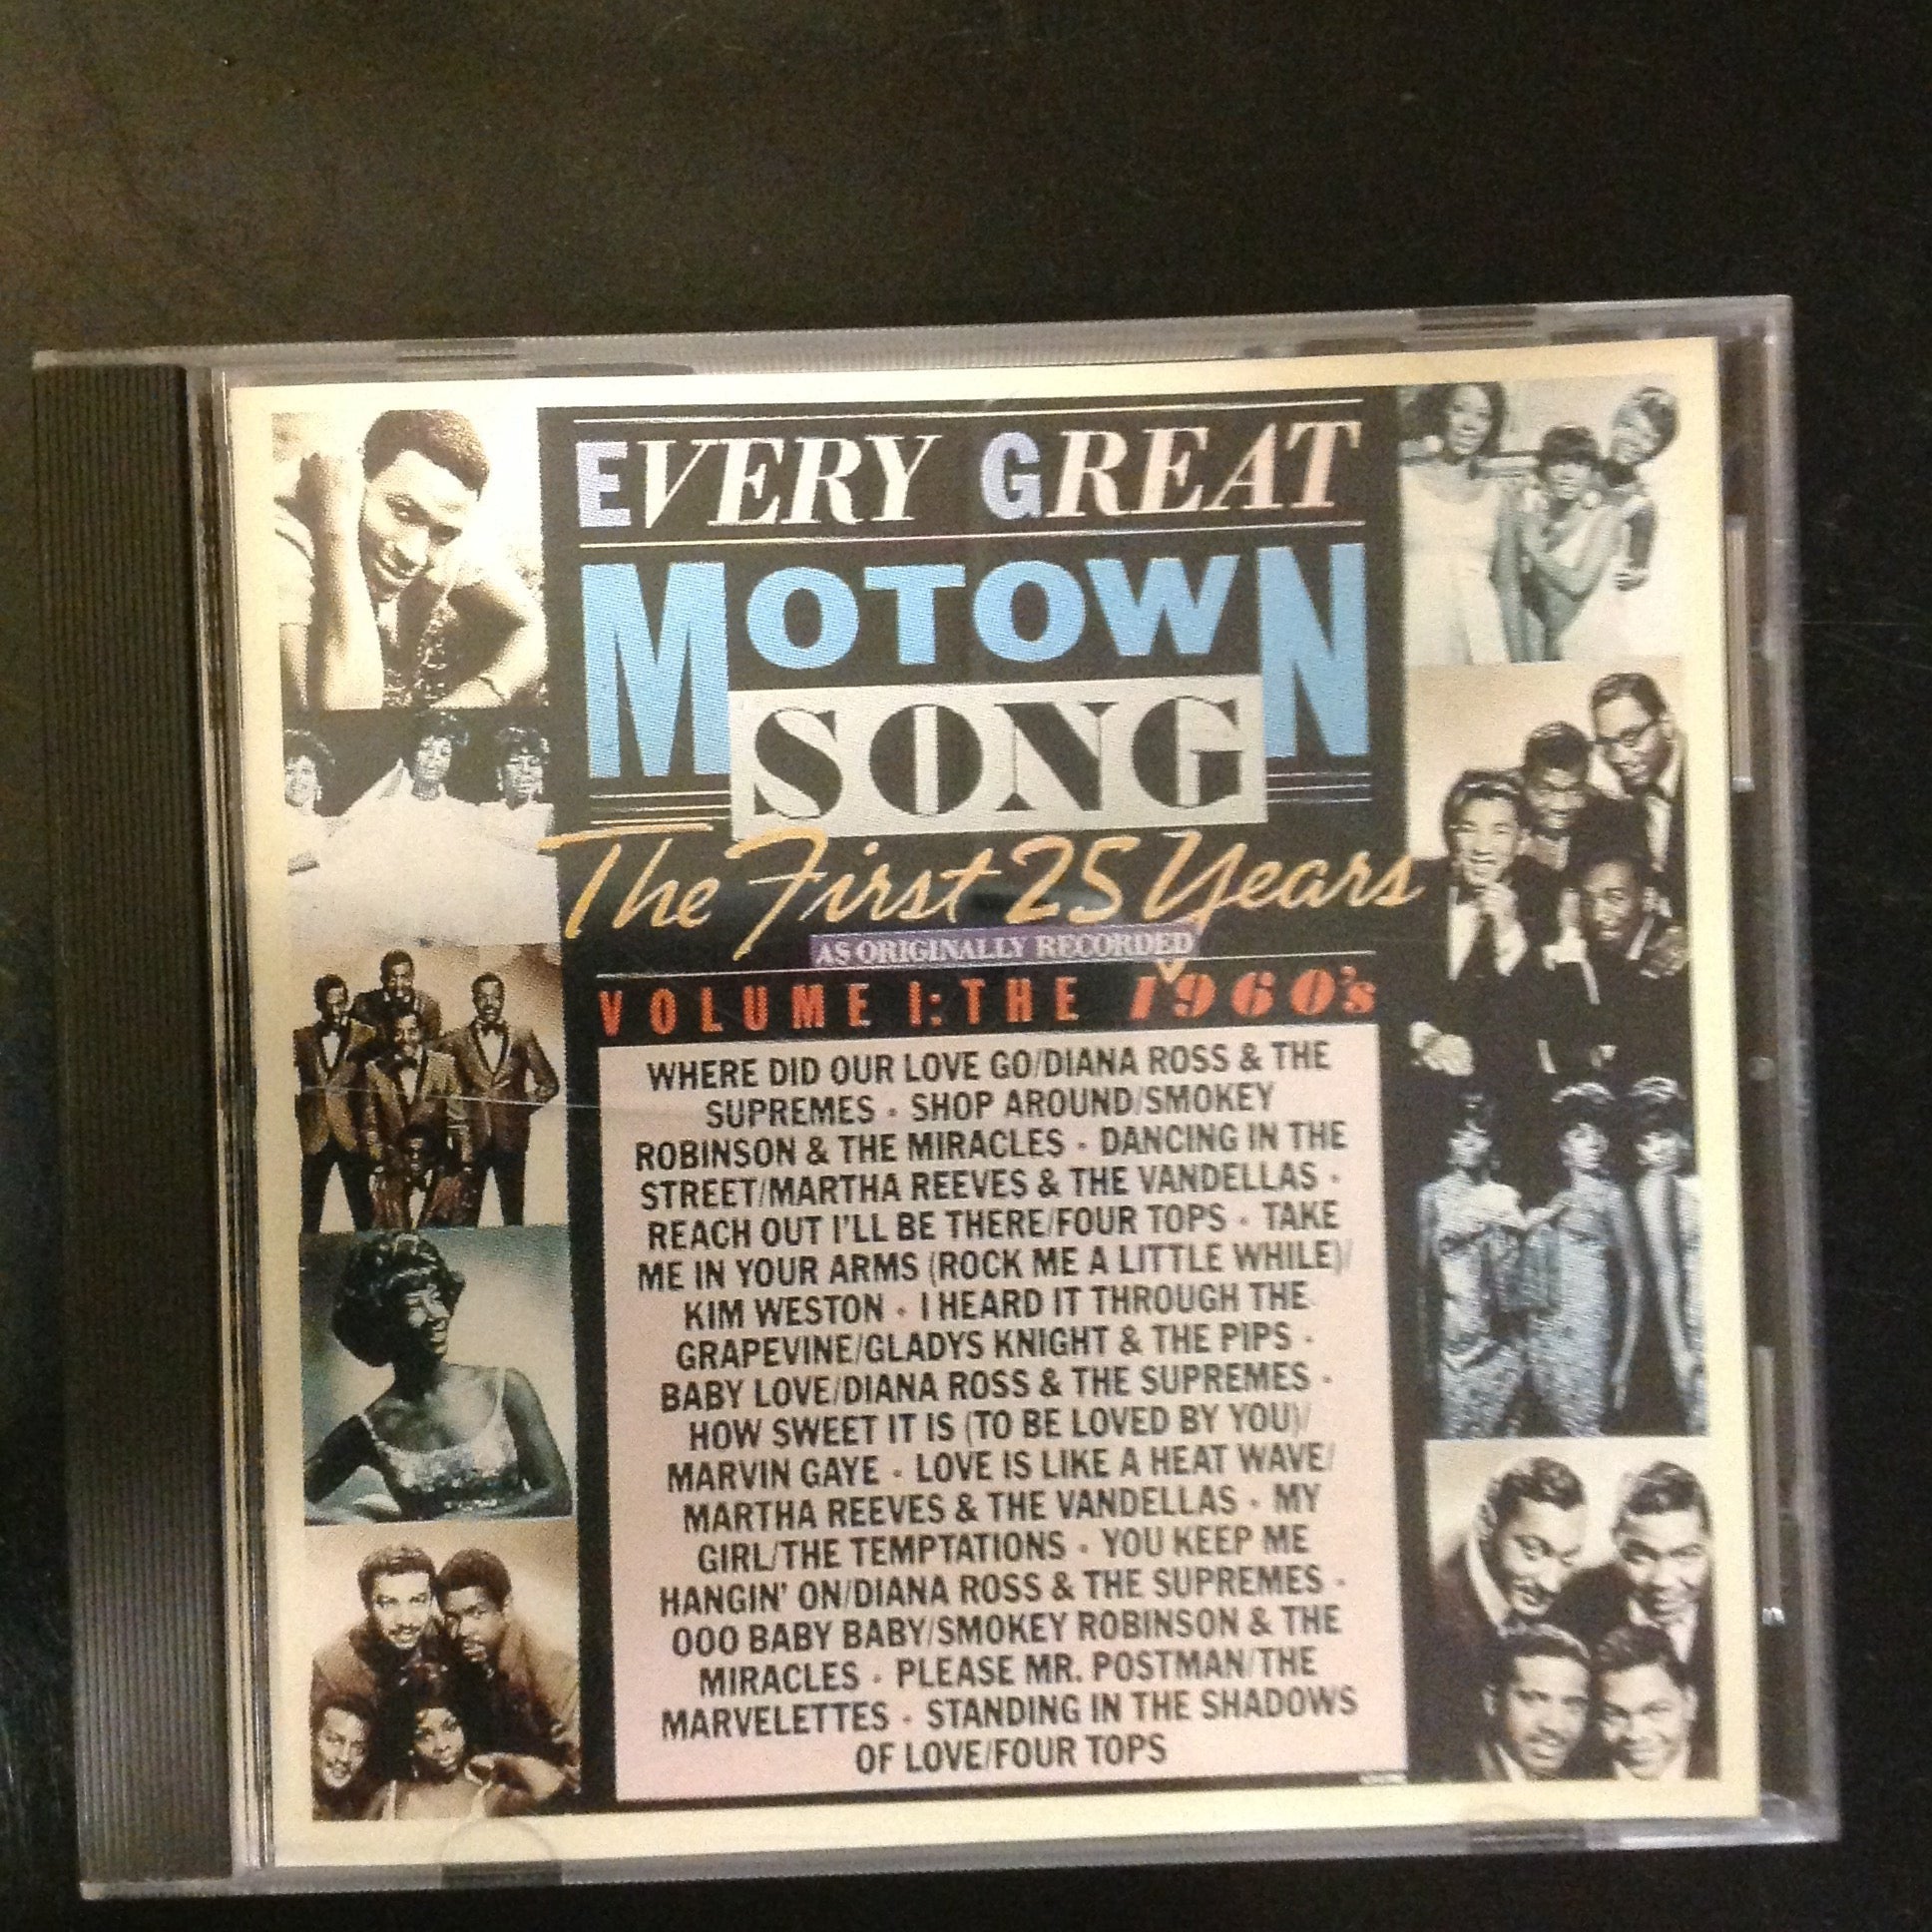 CD Every Great Motown Song: The First 25 Years VOlume Vol. 1 Detroit Various Artists 3746353432 Diana Ross Smokey Robinson Vandellas Four Tops Temptations